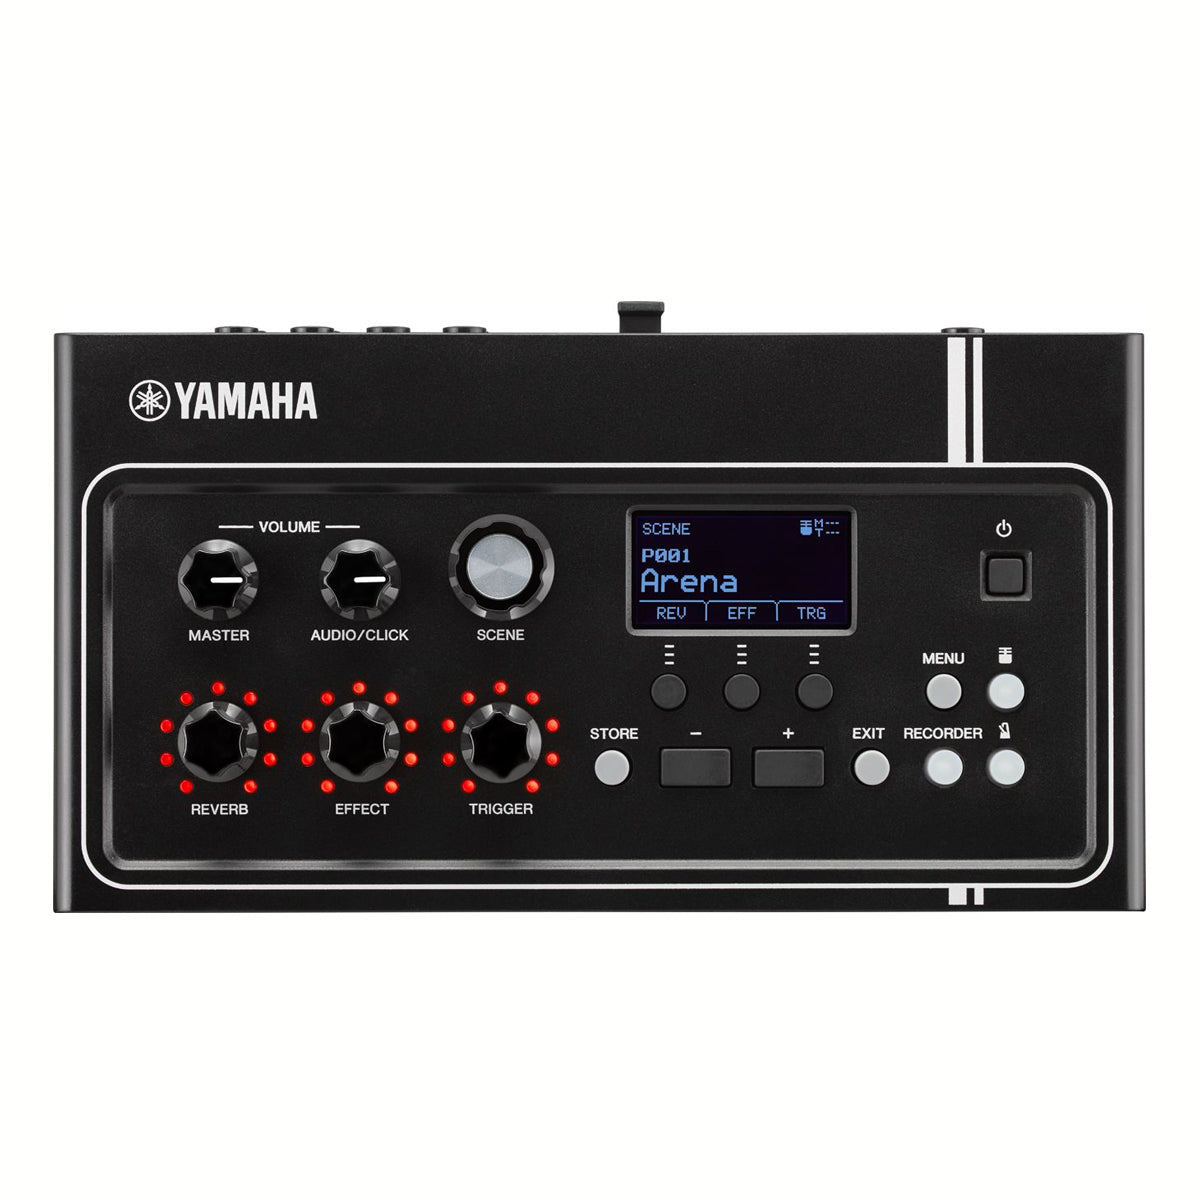 Yamaha EAD10 Drum Module with Mic and Trigger Pickup